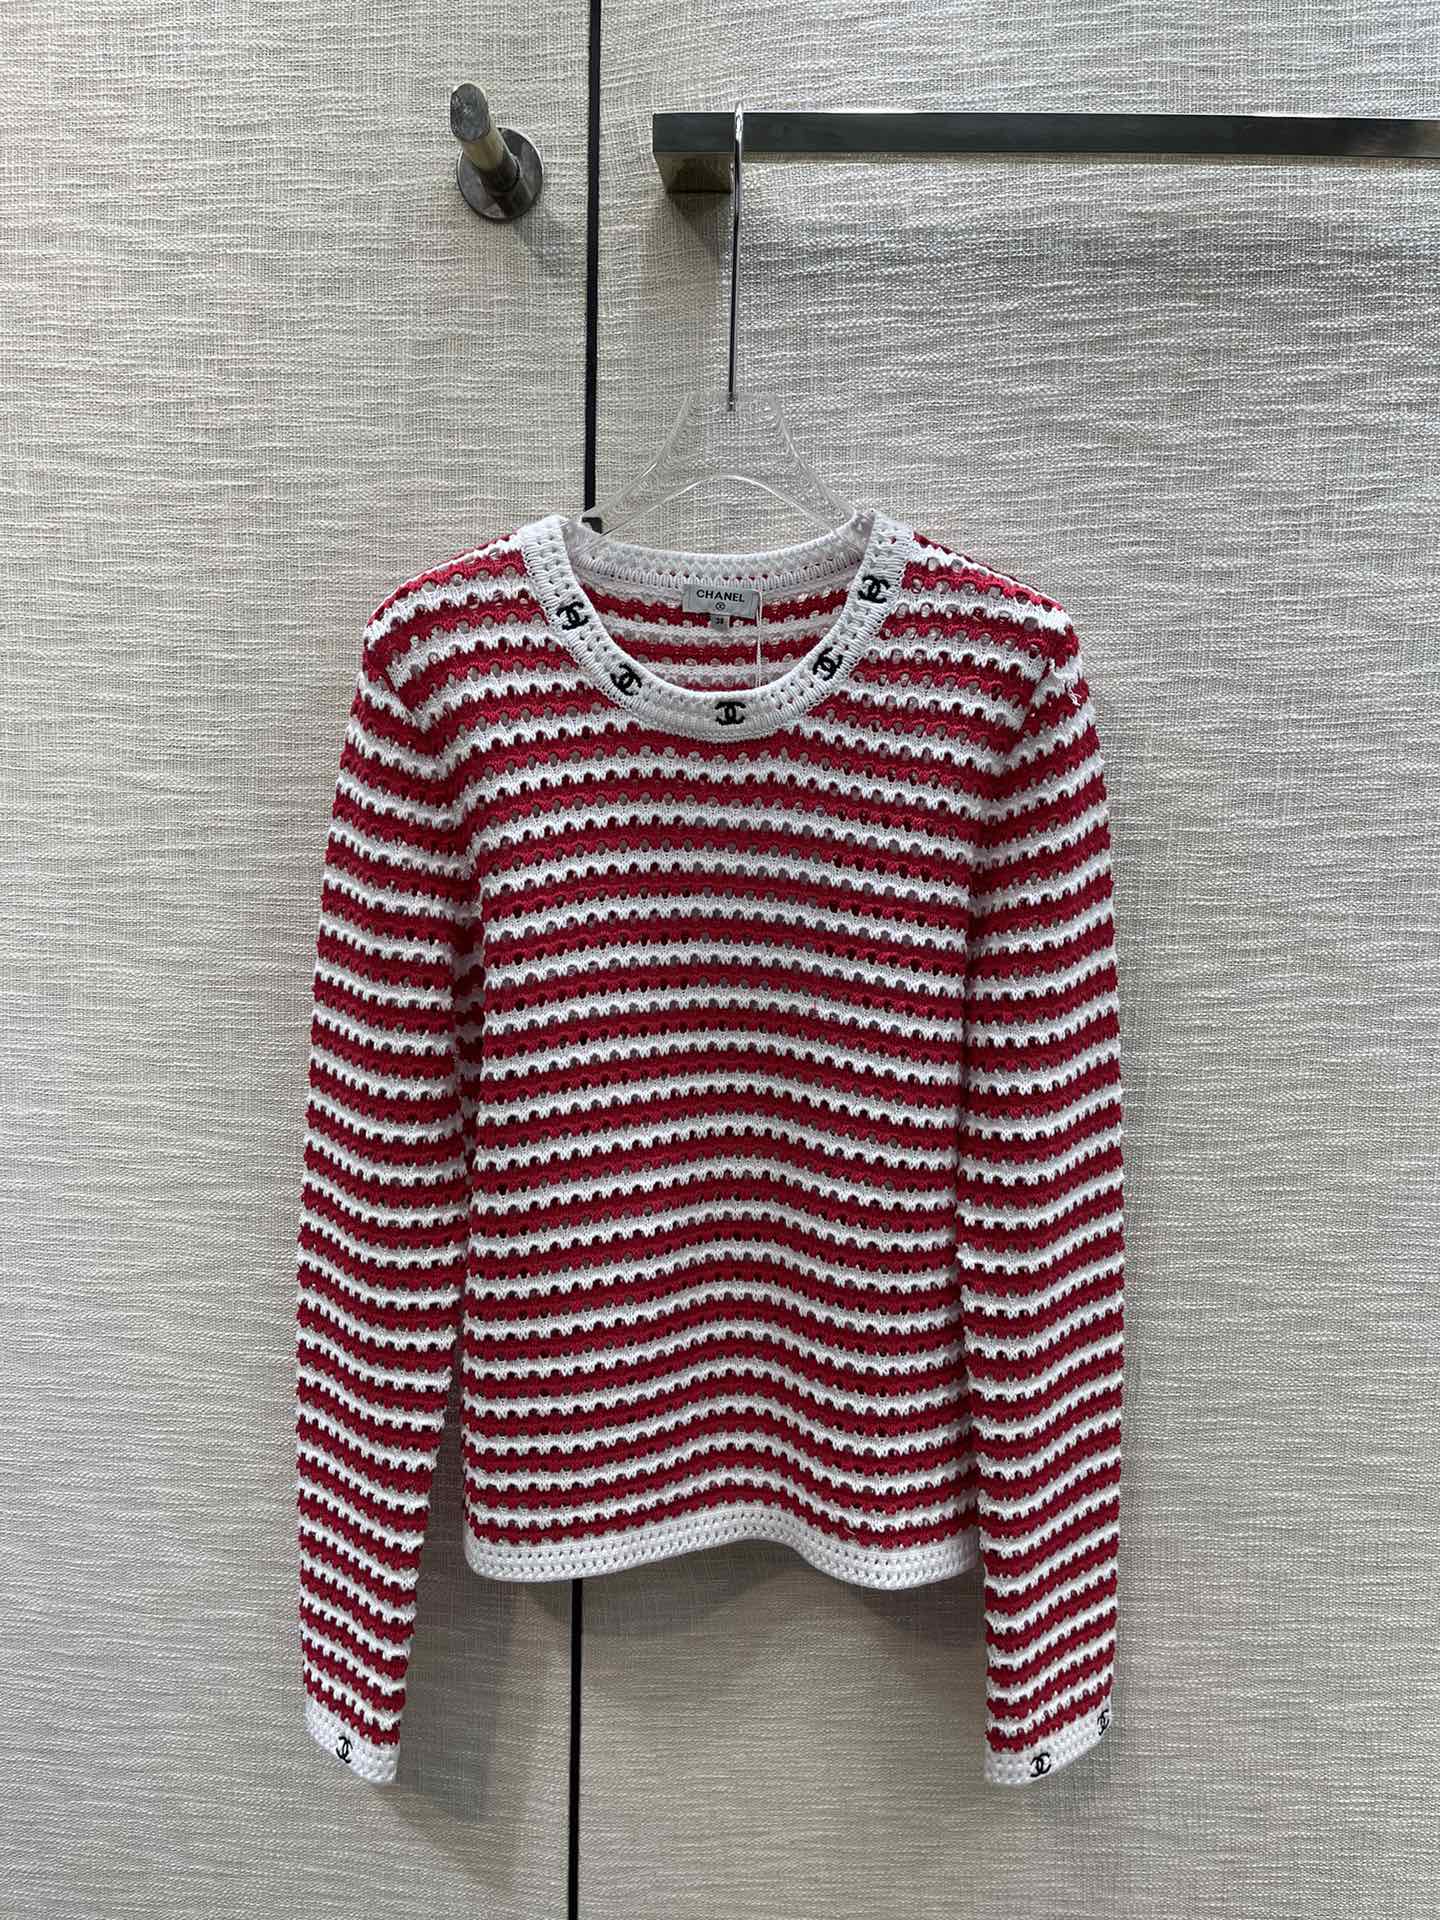 Chanel Clothing Sweatshirts Sell Online Luxury Designer
 Red White Embroidery Spring Collection